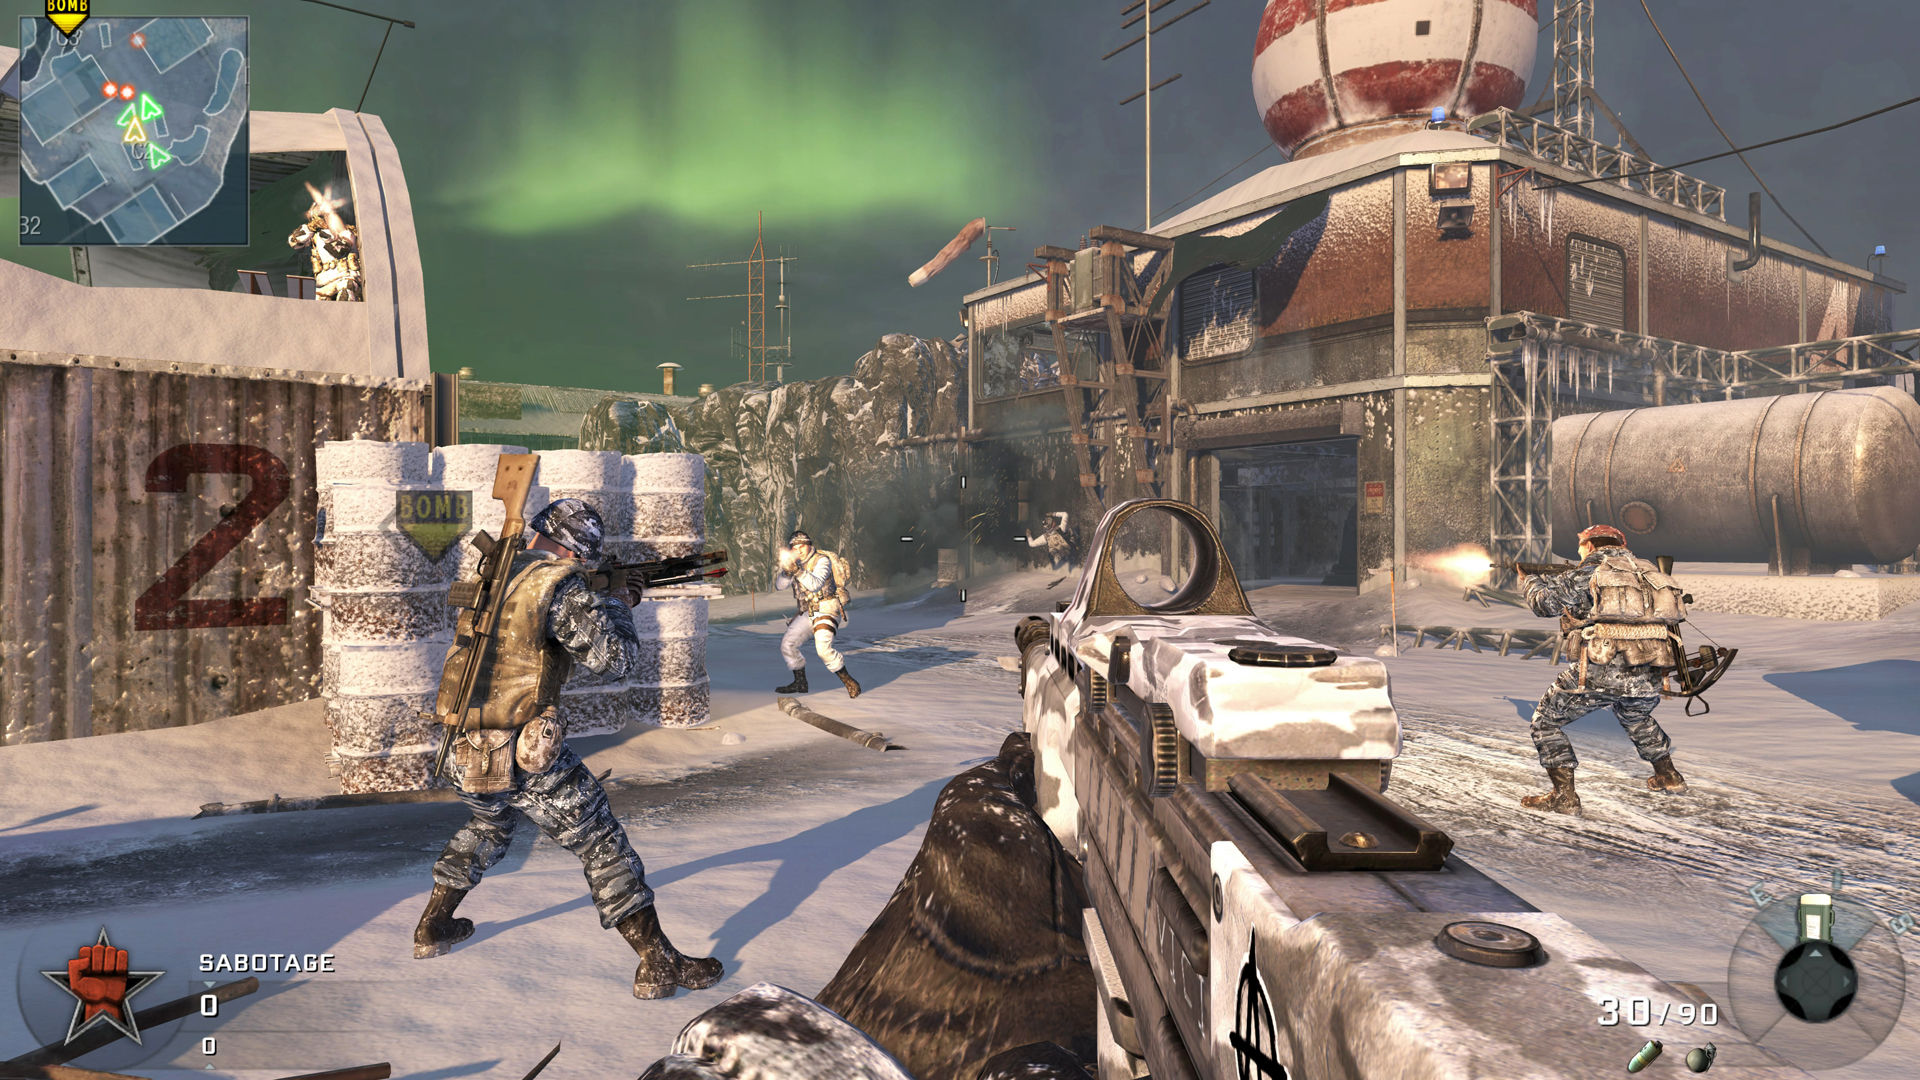 Call of Duty: Black Ops & Black Ops 2 w/ First Strike Map Pack